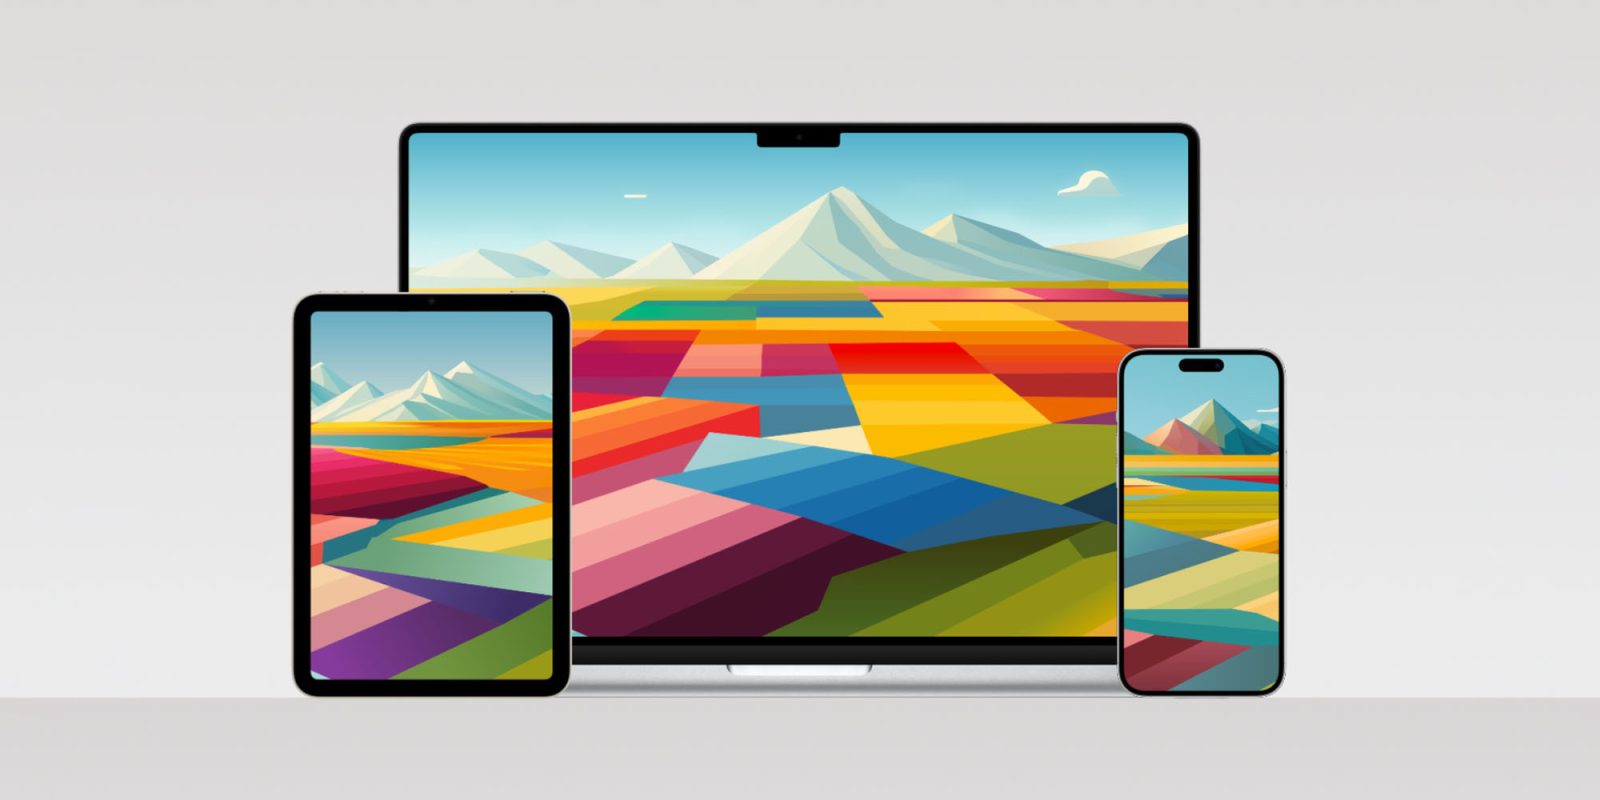 Download the beautiful Saltern wallpapers for iPhone, iPad, and Mac from  Basic Apple Guy - 9to5Mac